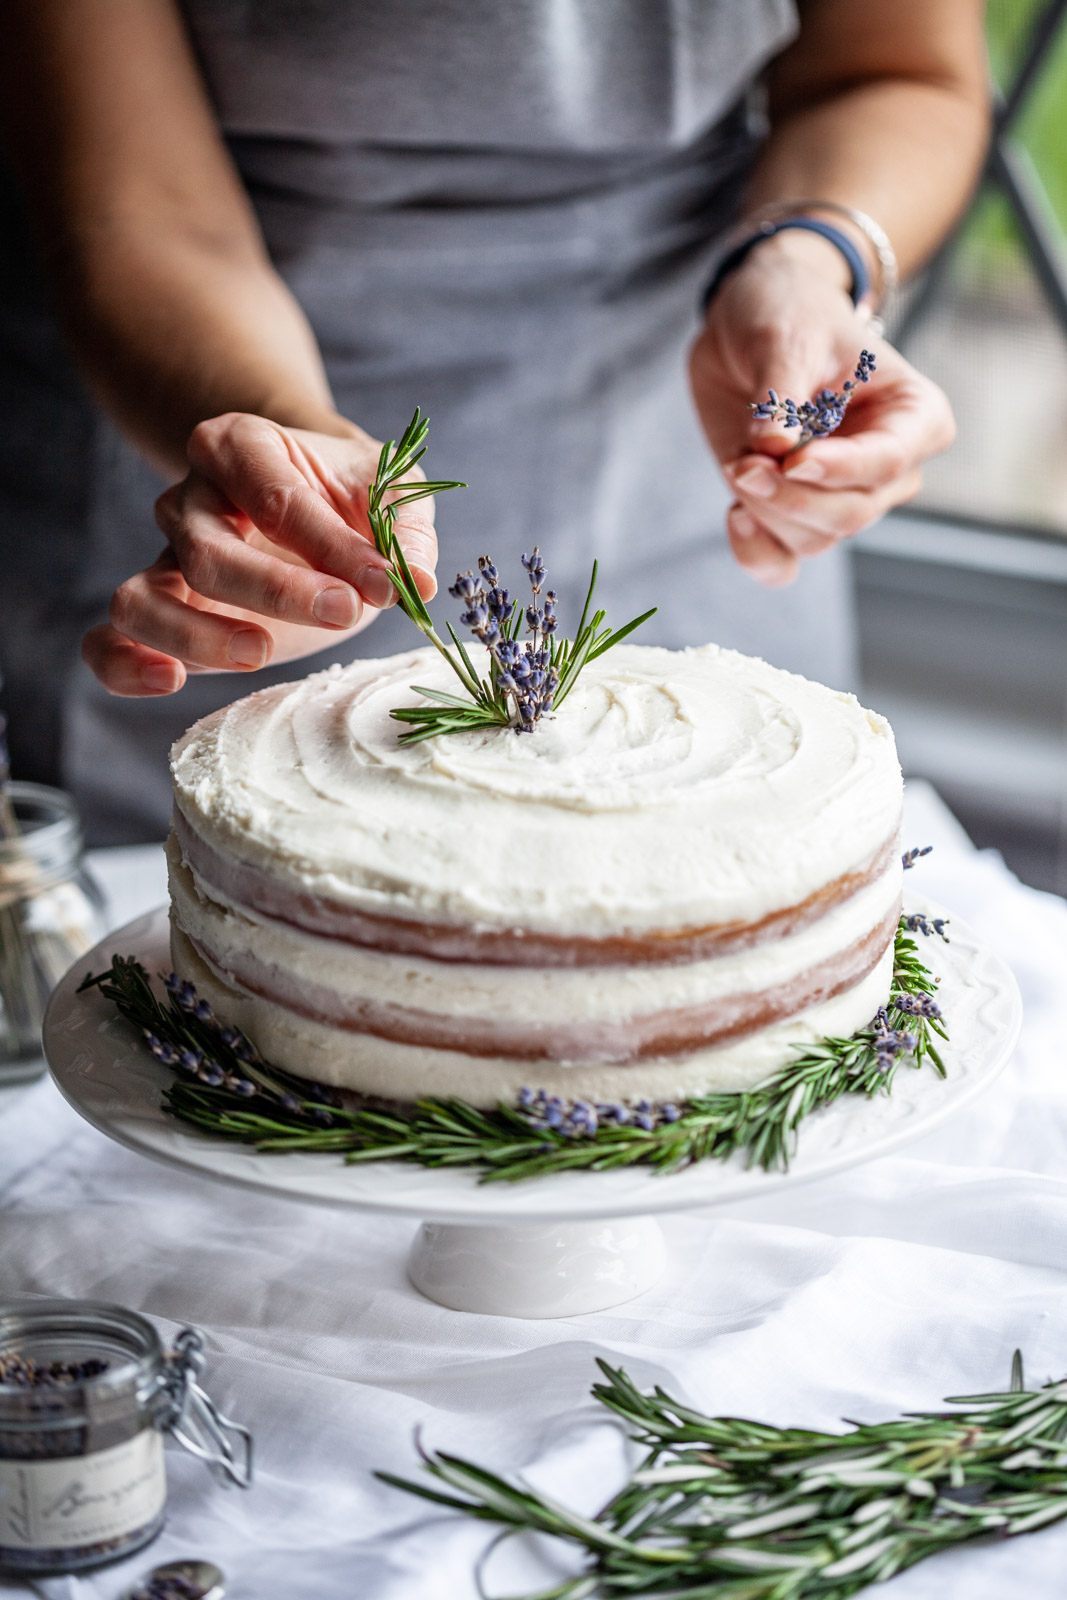 Rosemary Lavender Cake With a Lavender Buttercream